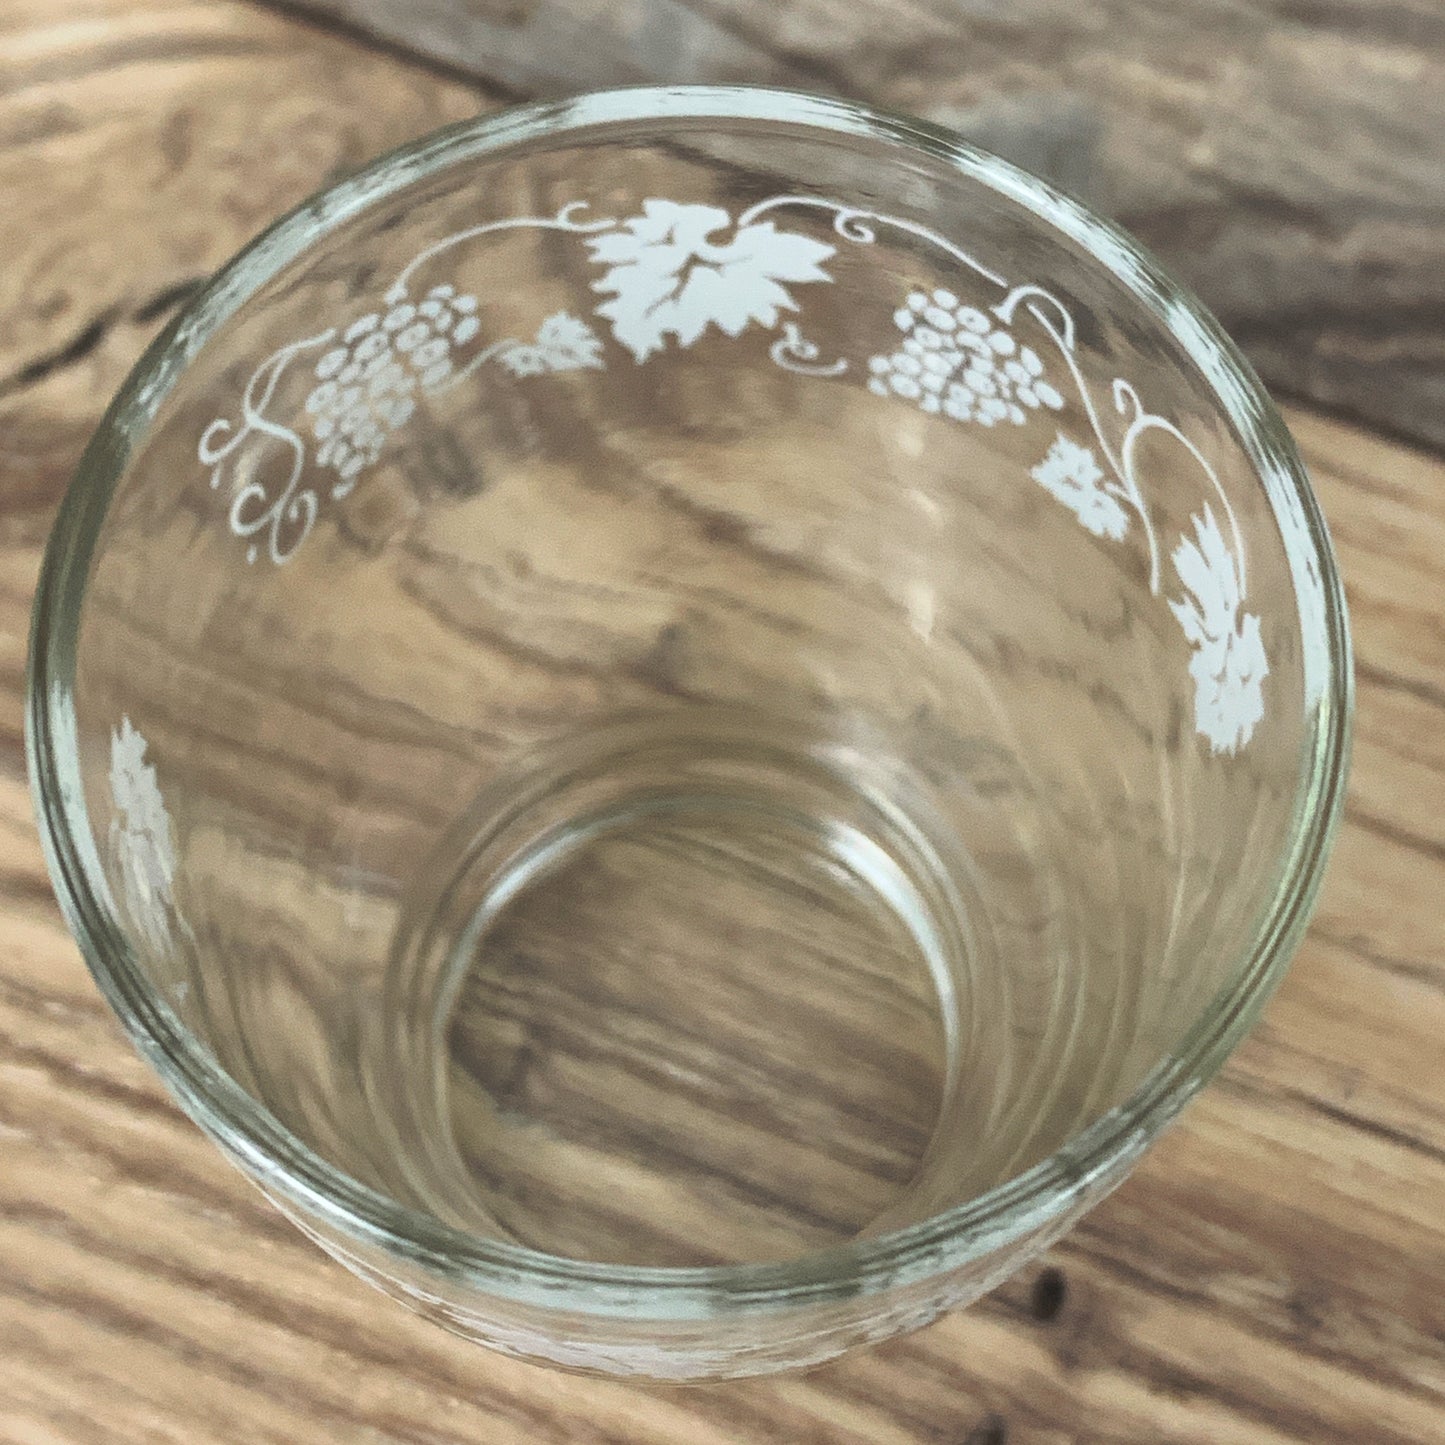 Small Vintage Juice Glasses with White Grapevine Border